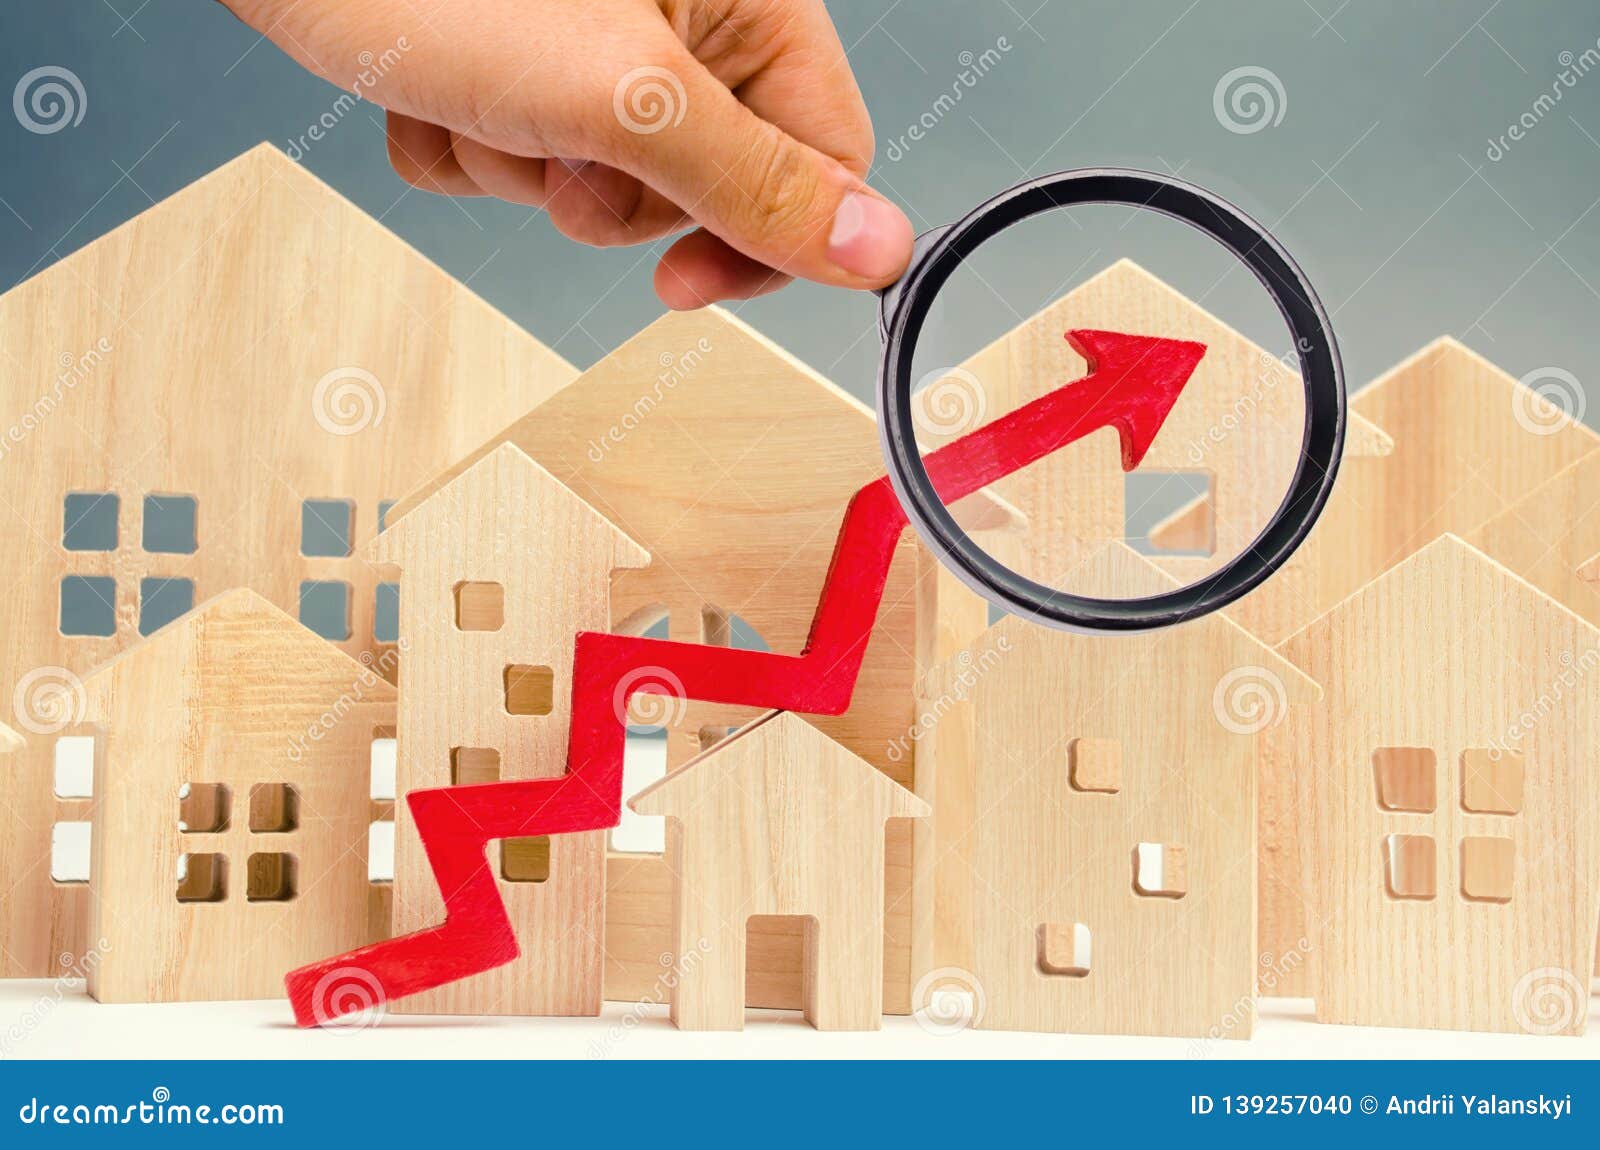 the concept of real estate market growth. the increase in housing prices. rising prices for utilities. increased interest in